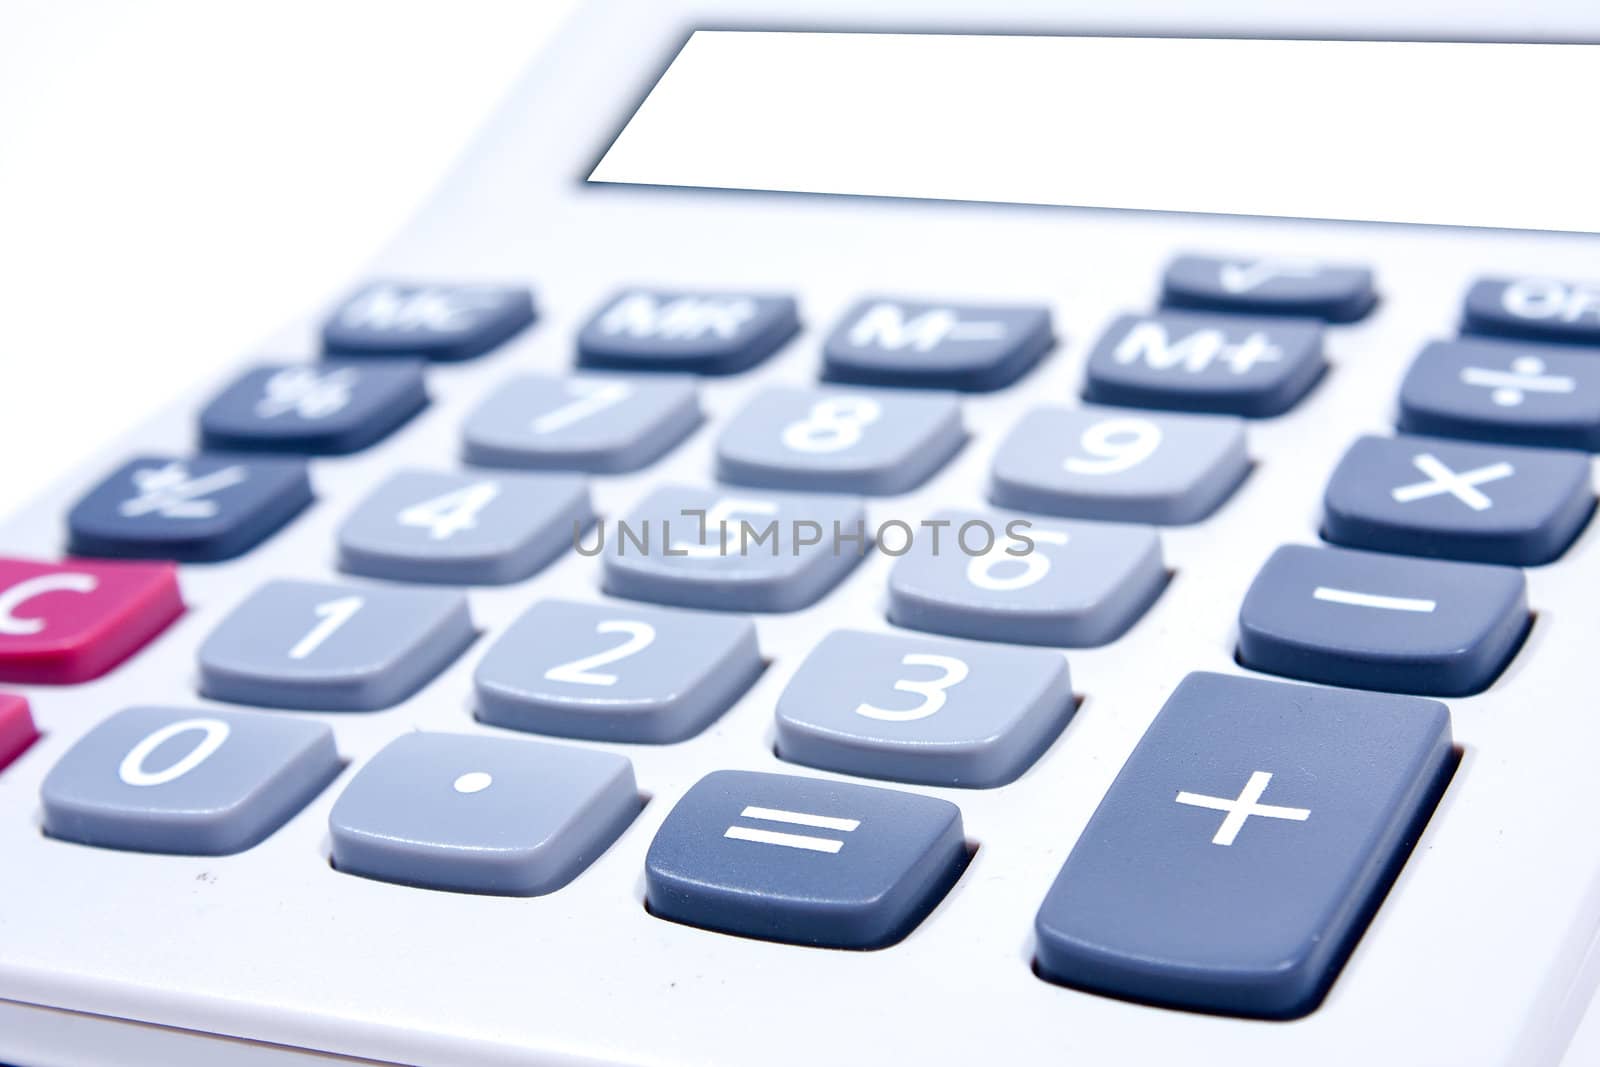 Calculator on a white background. Using addition, subtraction, basic calculator.